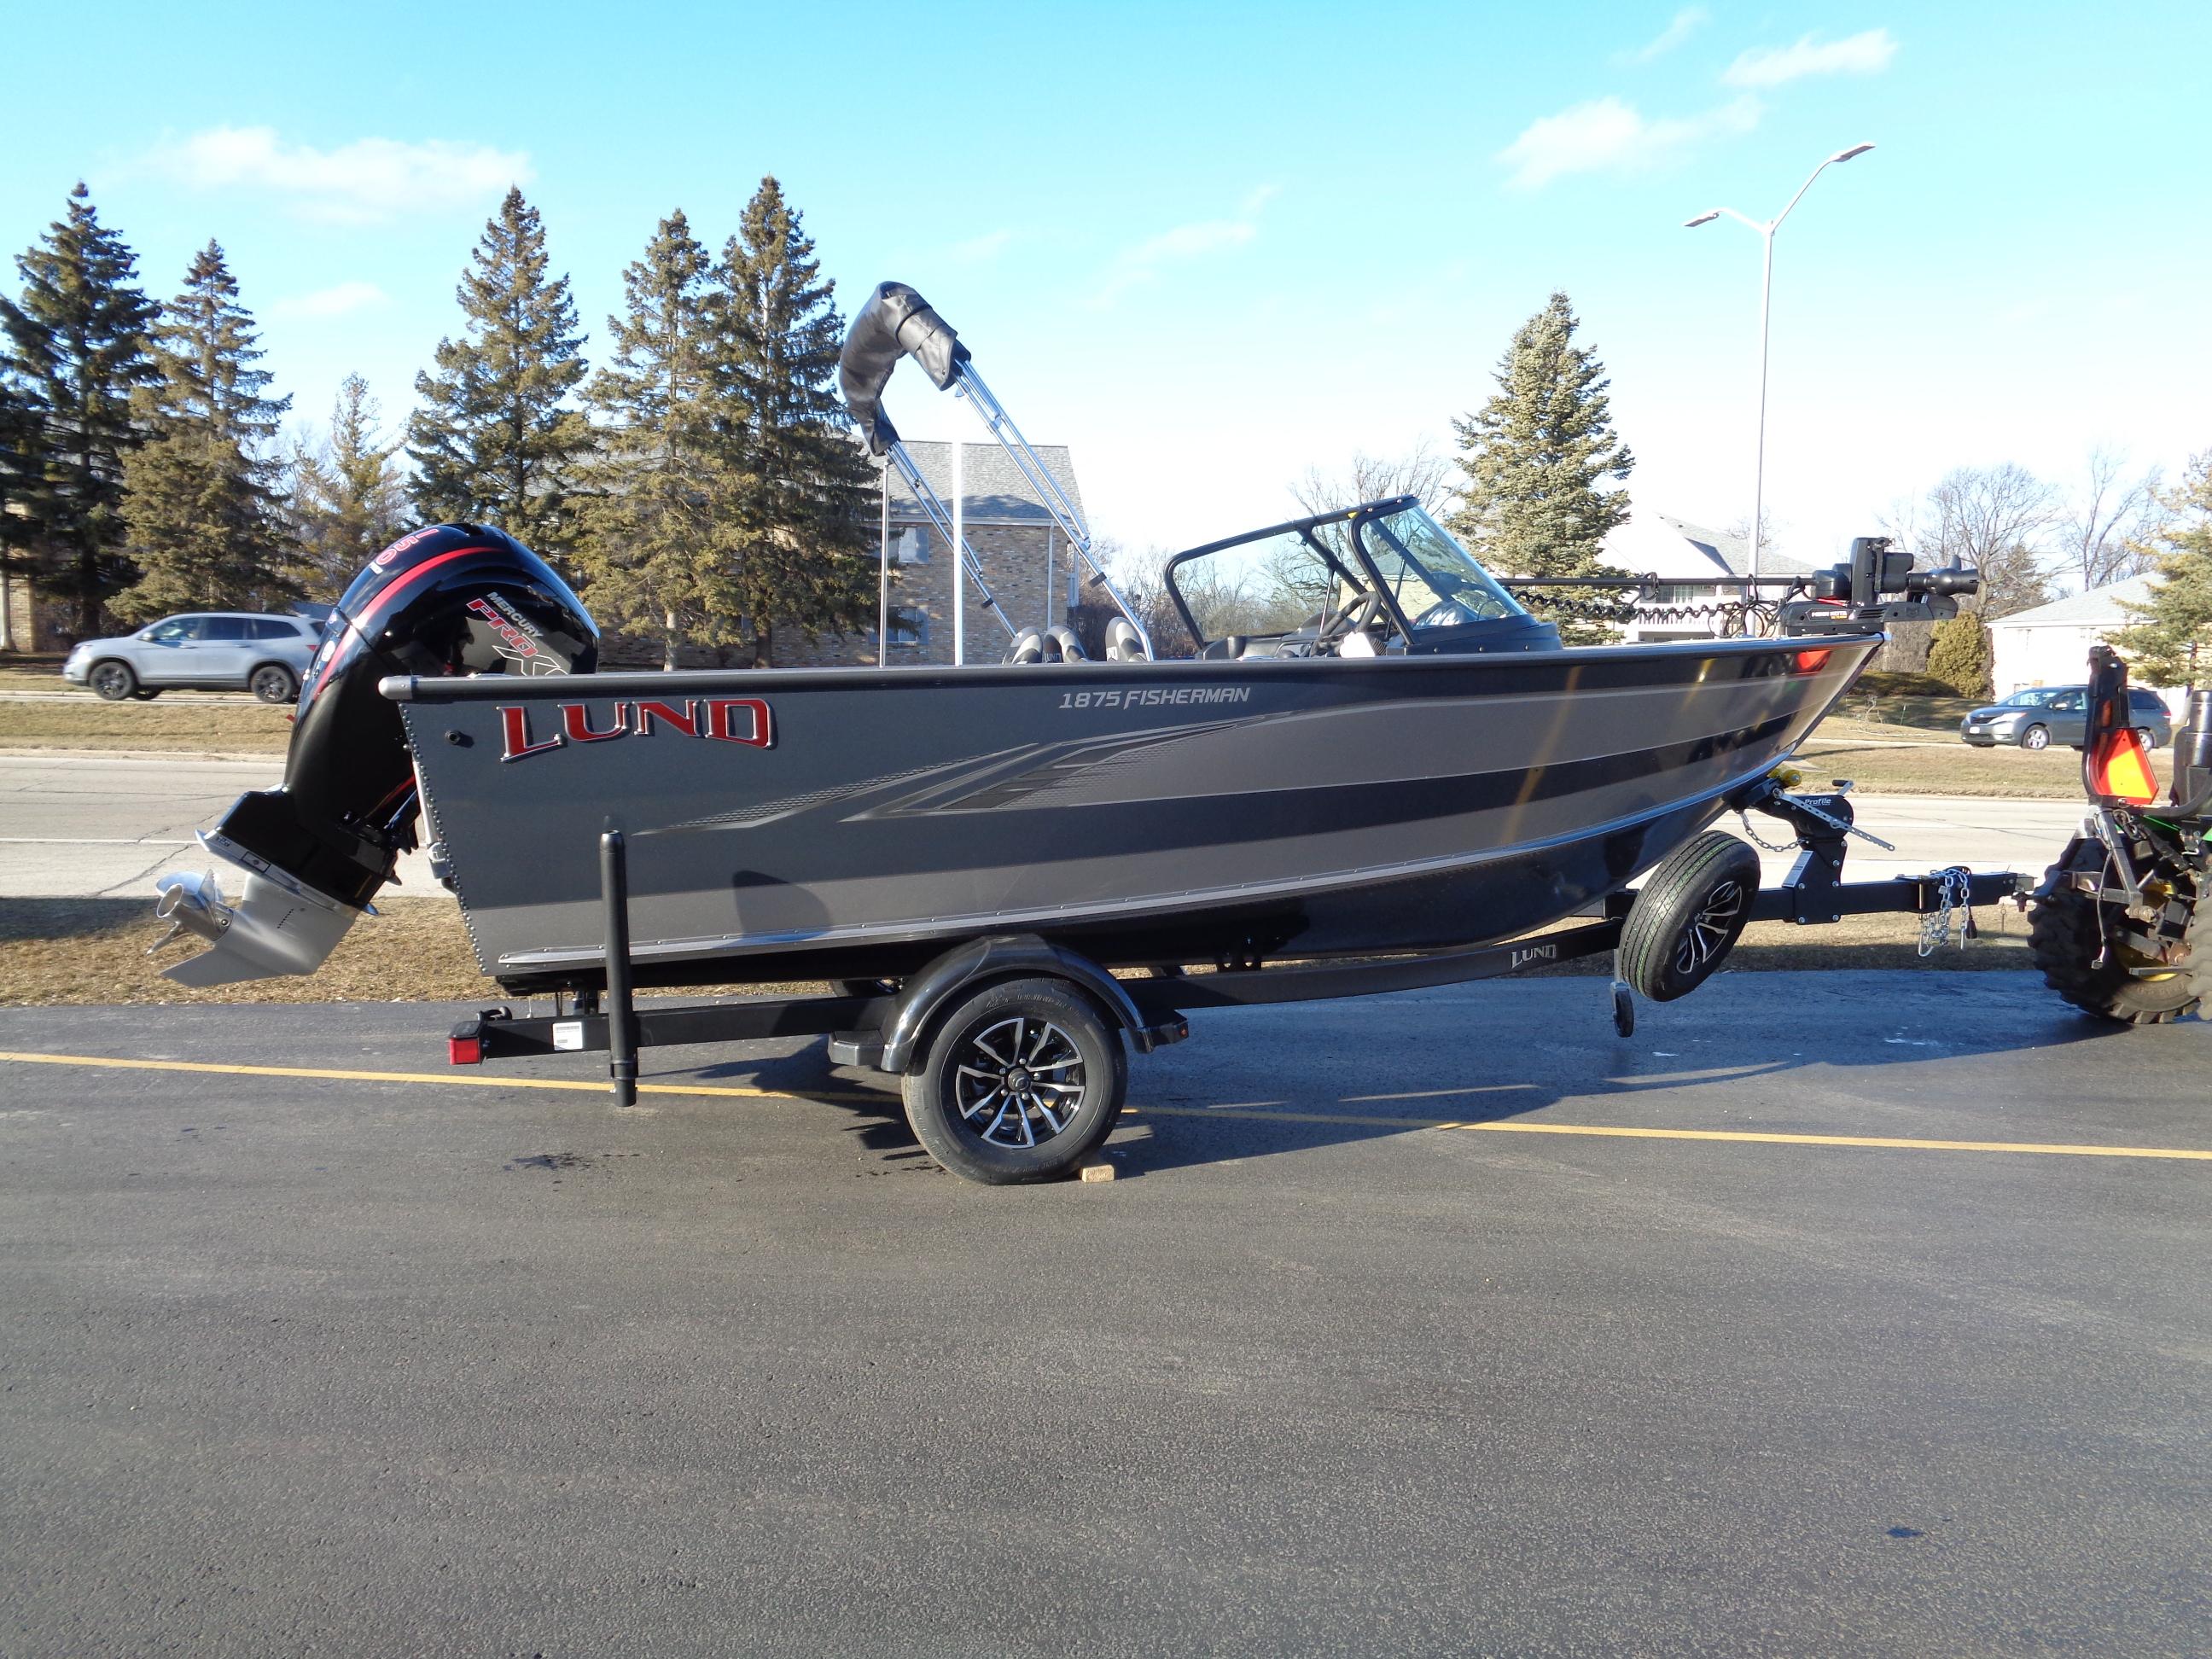 Ranger 600 series with Riggers - Walleye Message Central